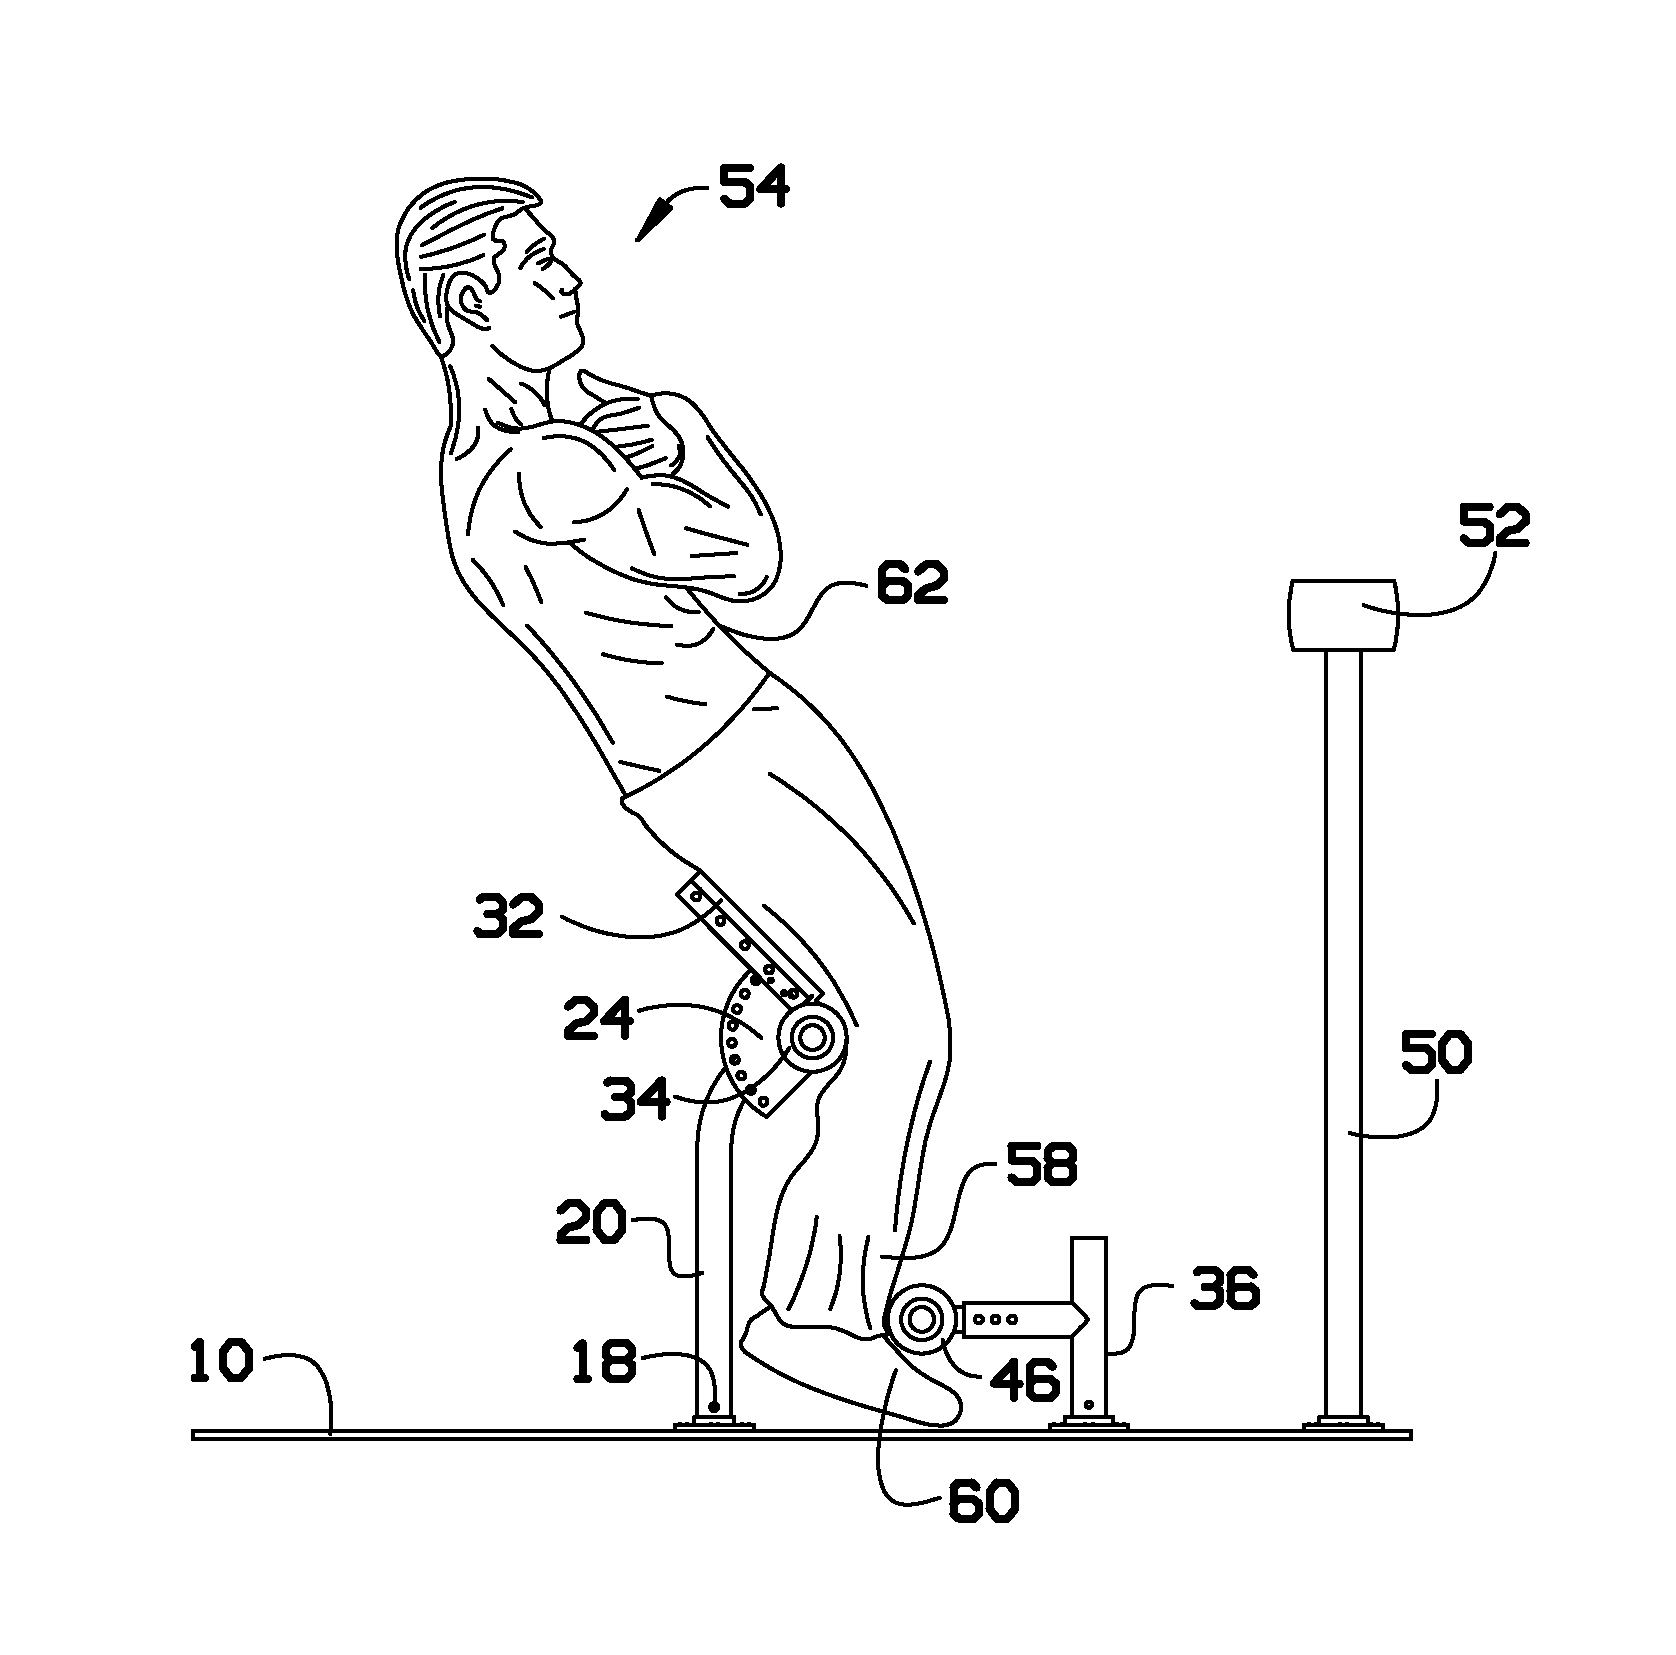 Abdominal/back muscle exercise device